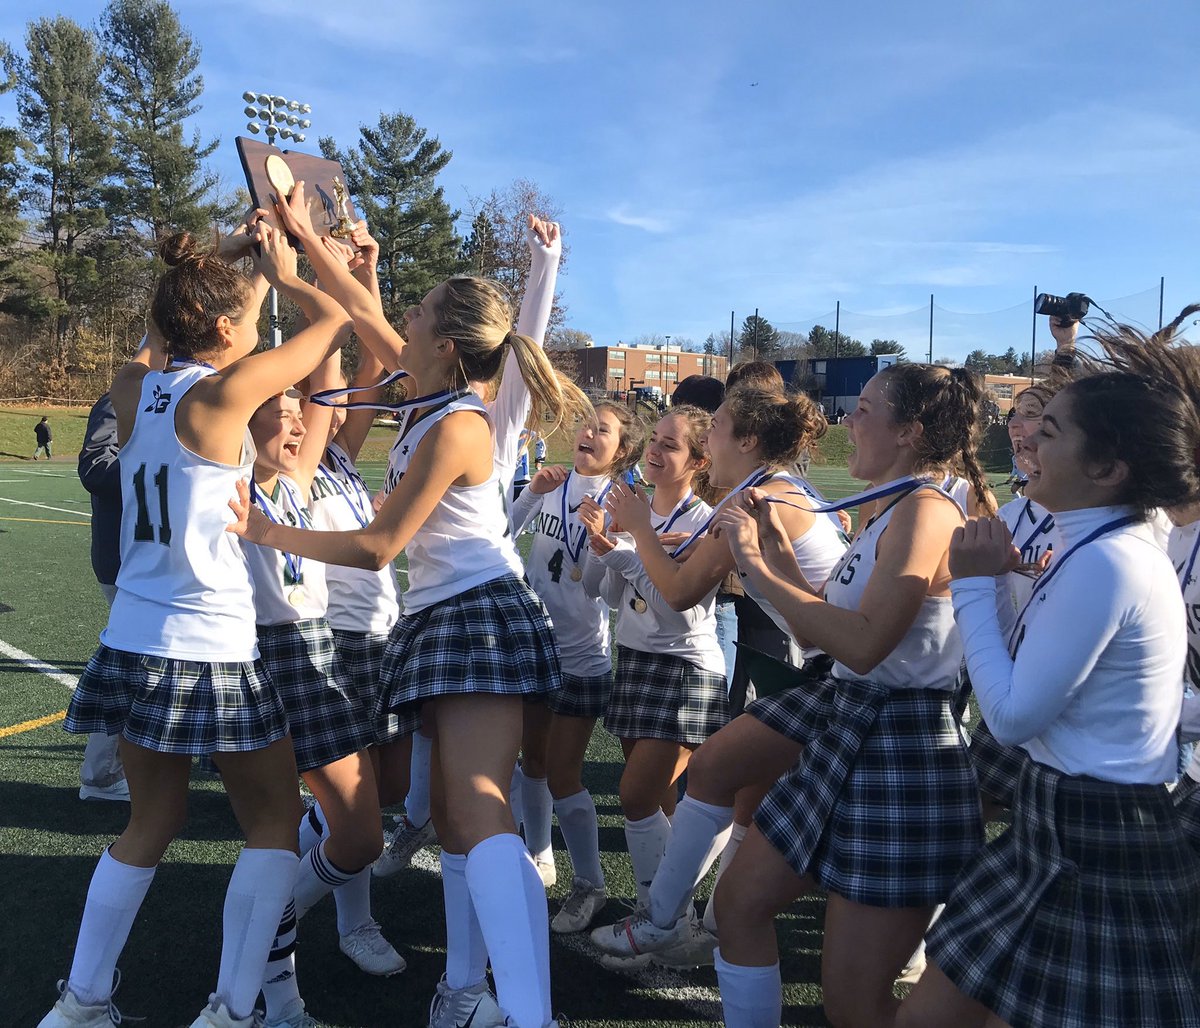 Hand made it a game late in the Class M state field hockey championship, but couldn’t quite finish the rally, falling to Guilford 3-2. “I think we play another 10 minutes, we might be able to close that deal.”  https://www.courant.com/sports/high-schools/hc-sp-hs-class-m-field-hockey-1124-20191123-pyeco6gyifeqpgsgahcqasp4km-story.html#nt=oft-Double%20Chain~Feed-Driven%20Flex%20Feature~breaking-feed~unnamed-feature~~15~yes-art~automated~automatedpage